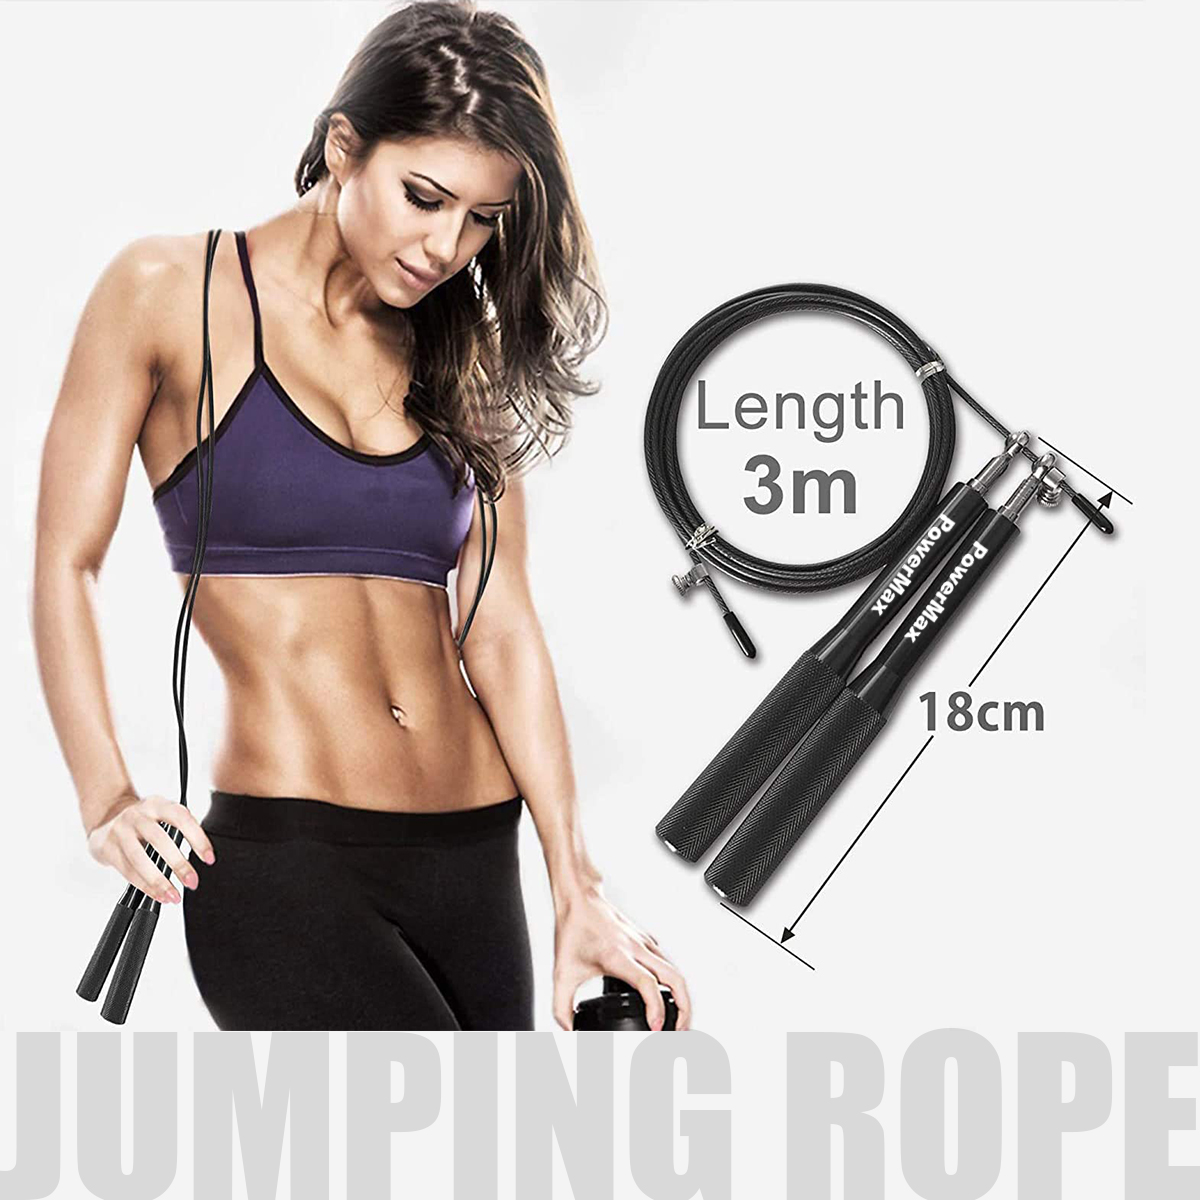 JA-3 (Black) Exercise Speed Jump Rope With Adjustable Cable